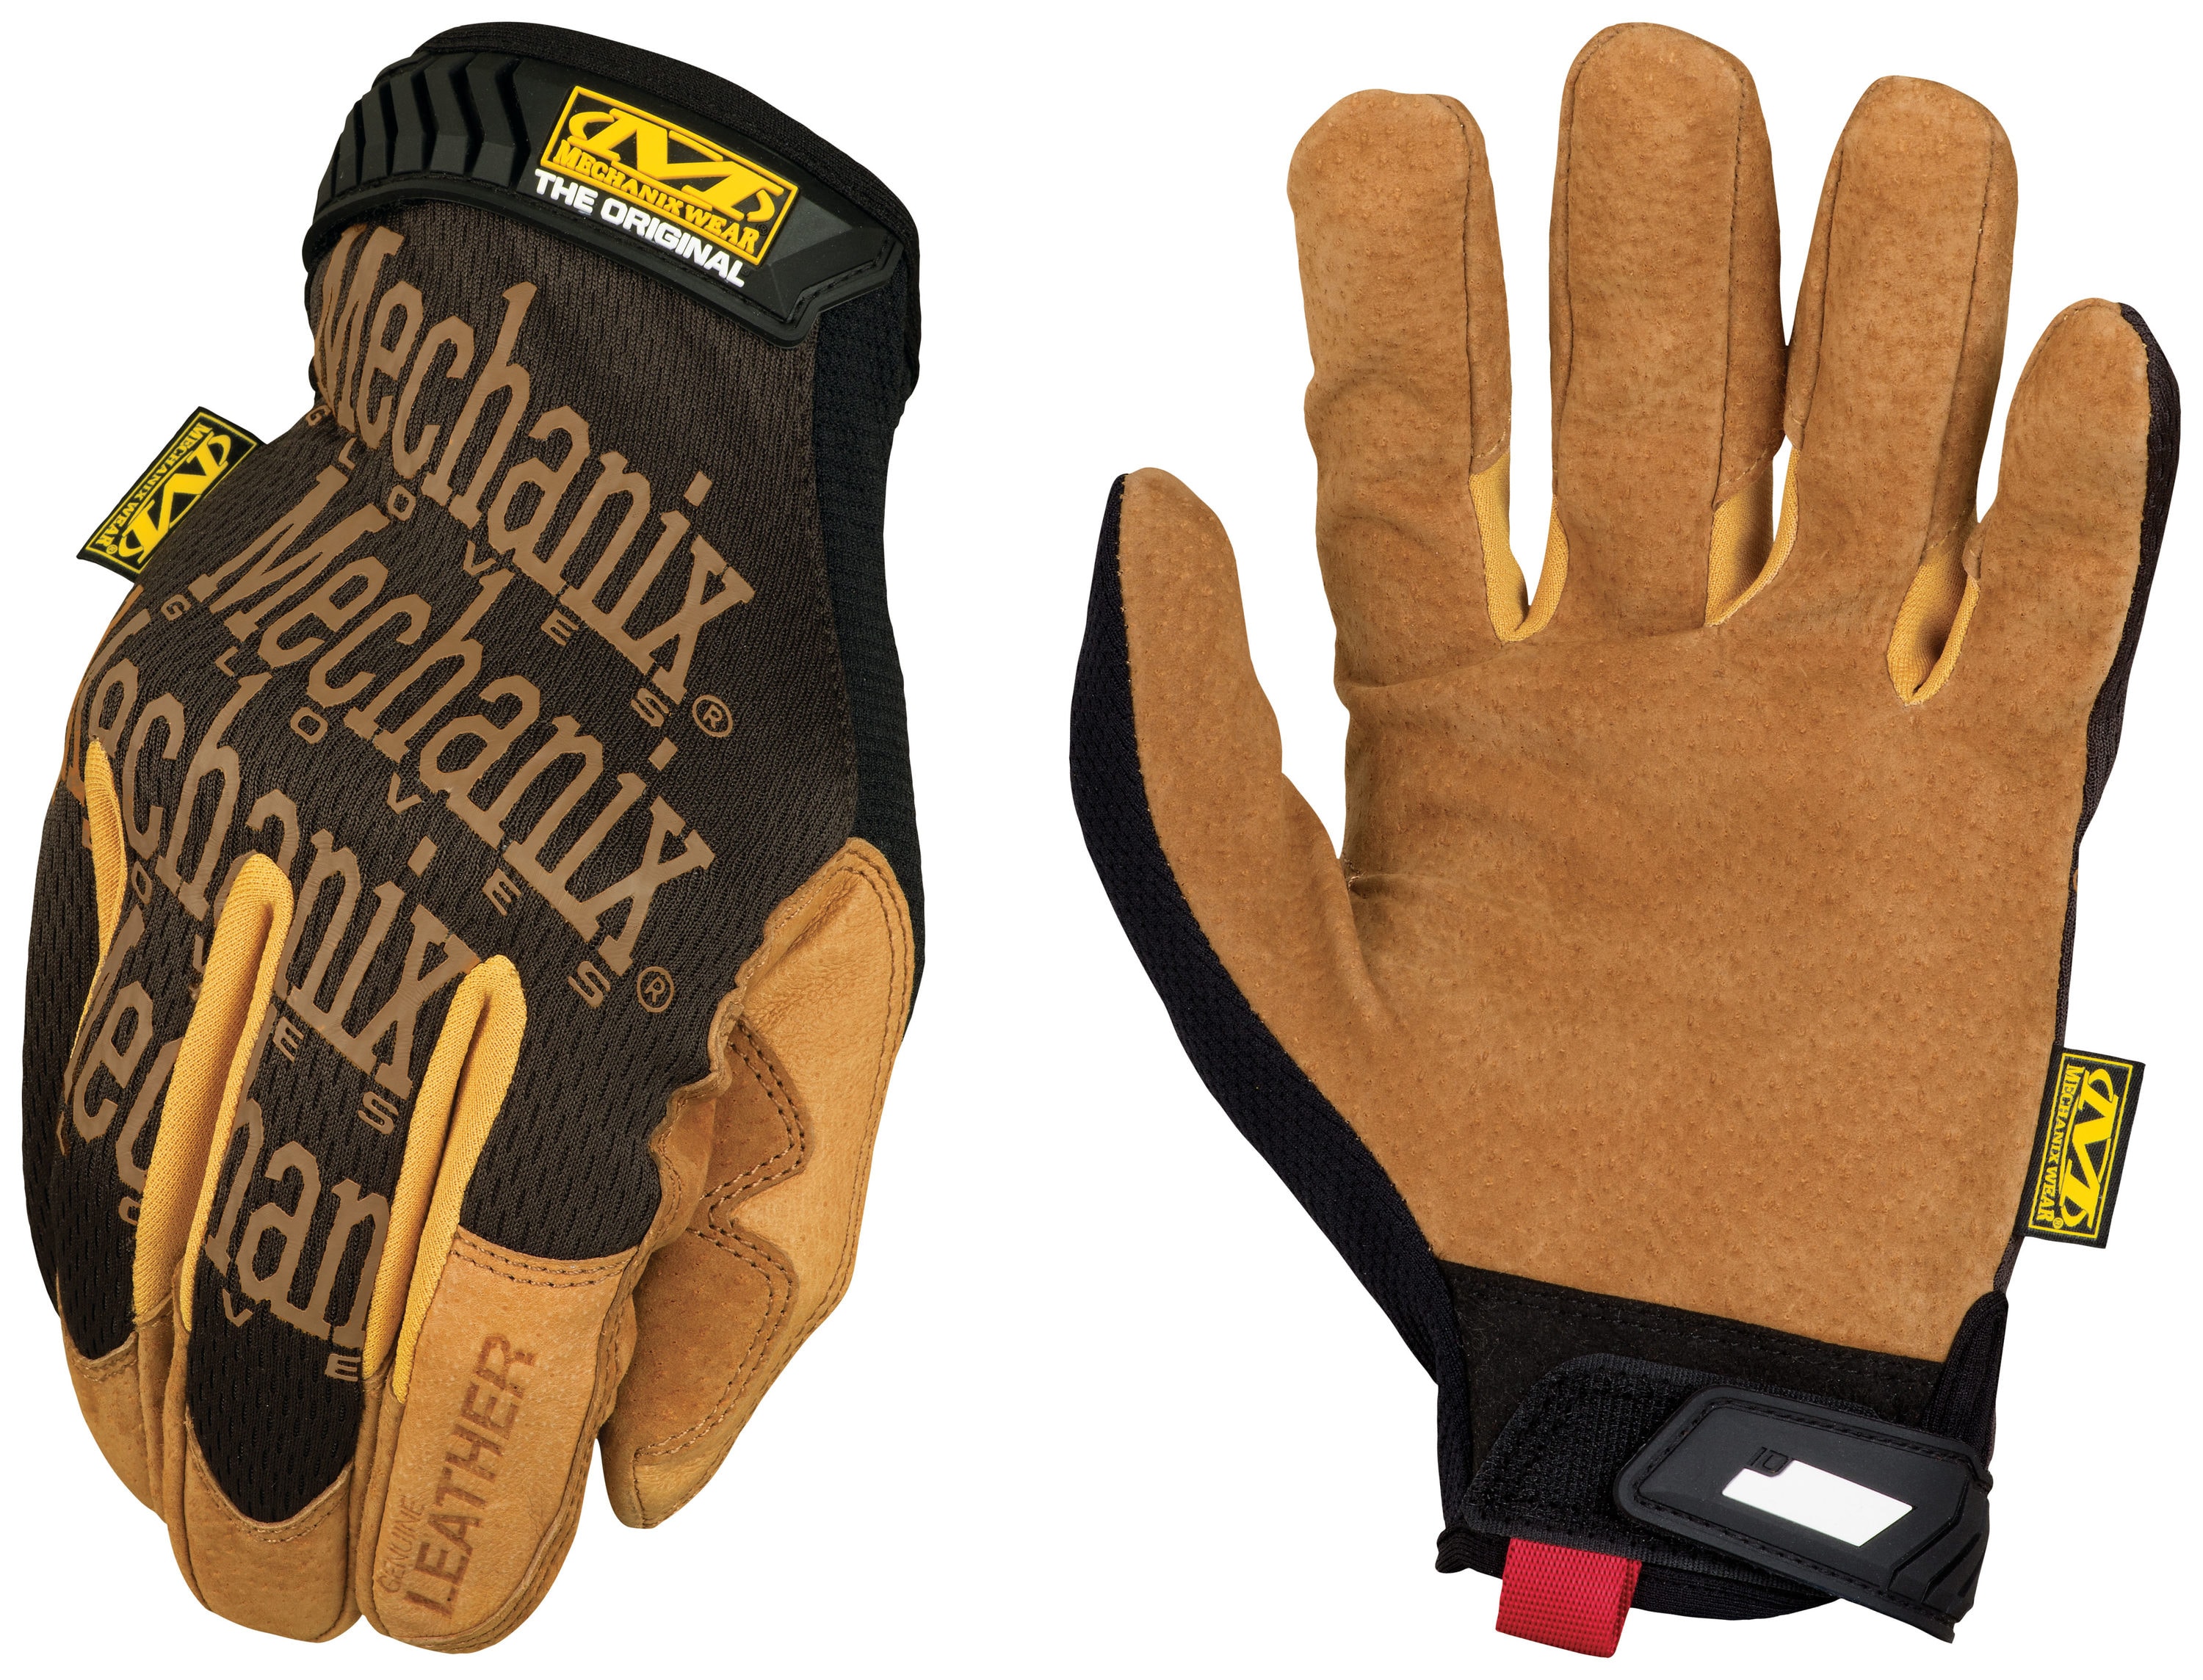 The Original Mechanix Wear Gloves Men's Sizes Small to 2X-Large in 5 Colors 